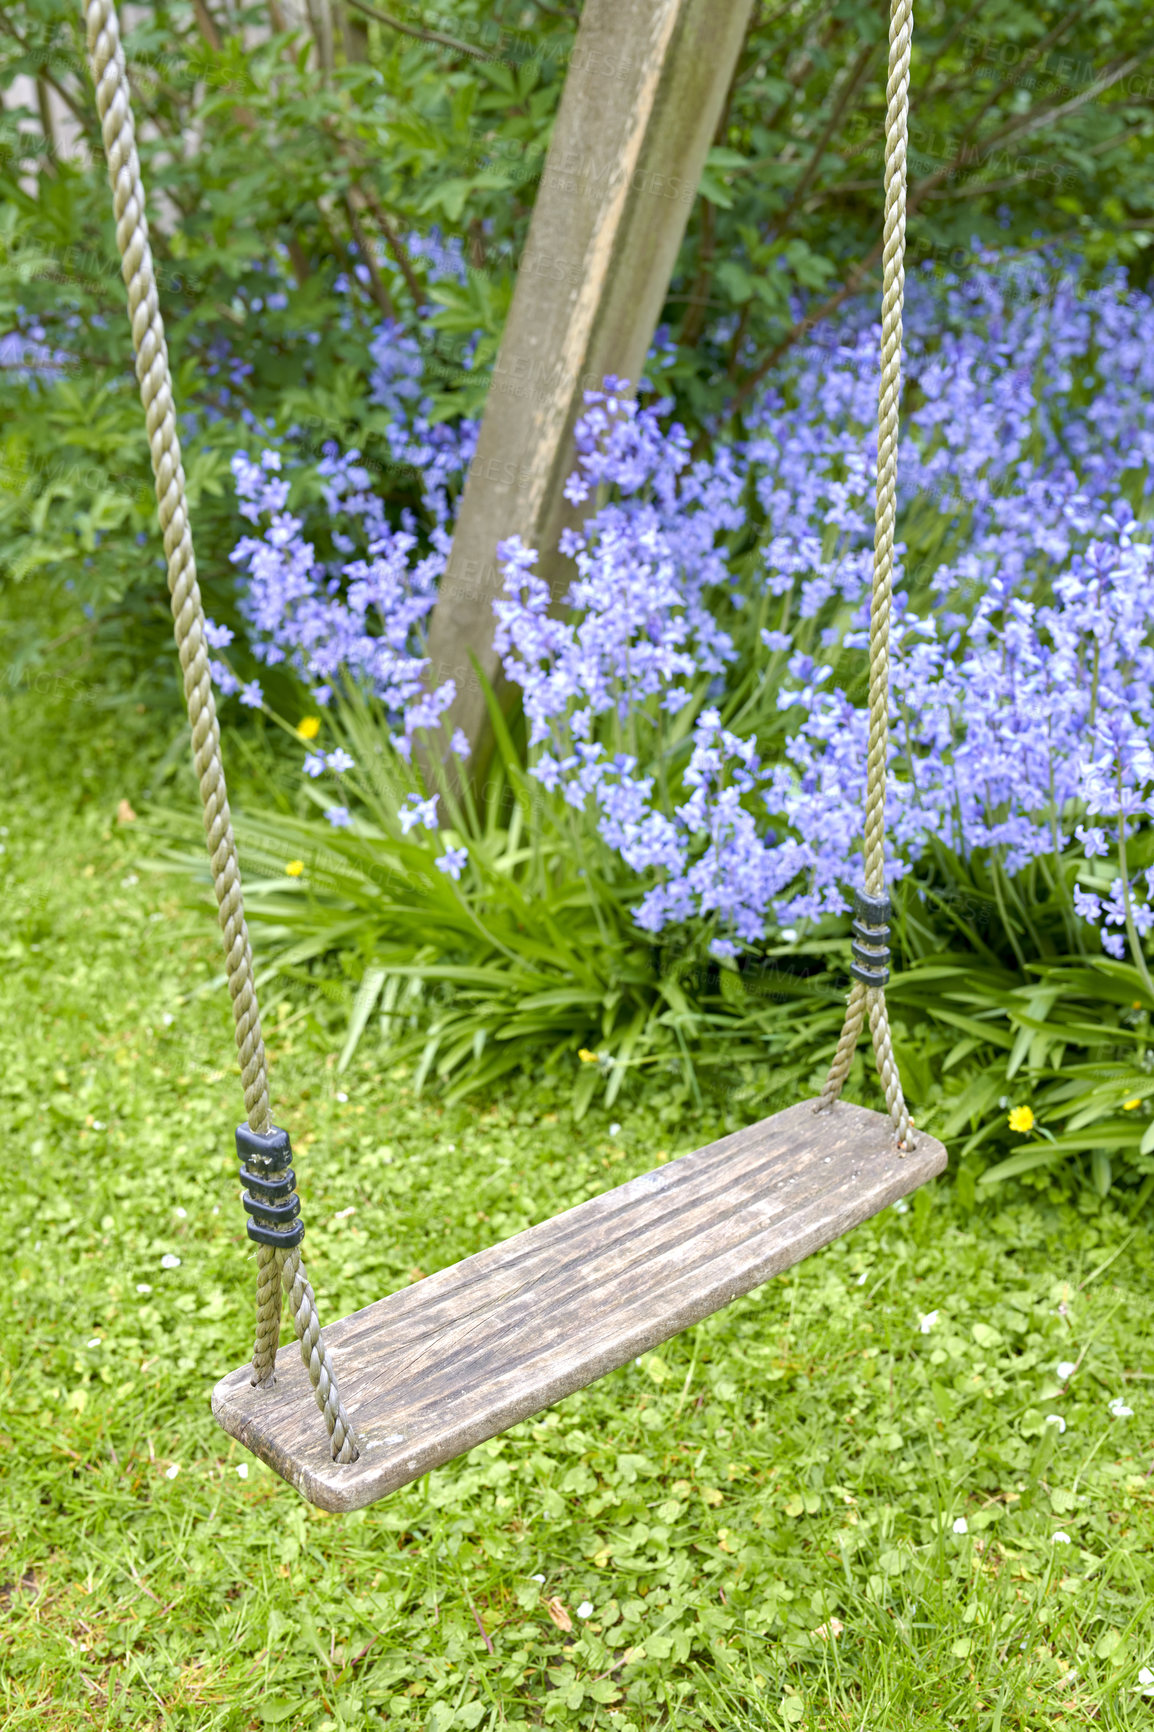 Buy stock photo Bluebell - Scilla siberica, blue flowers in late spring